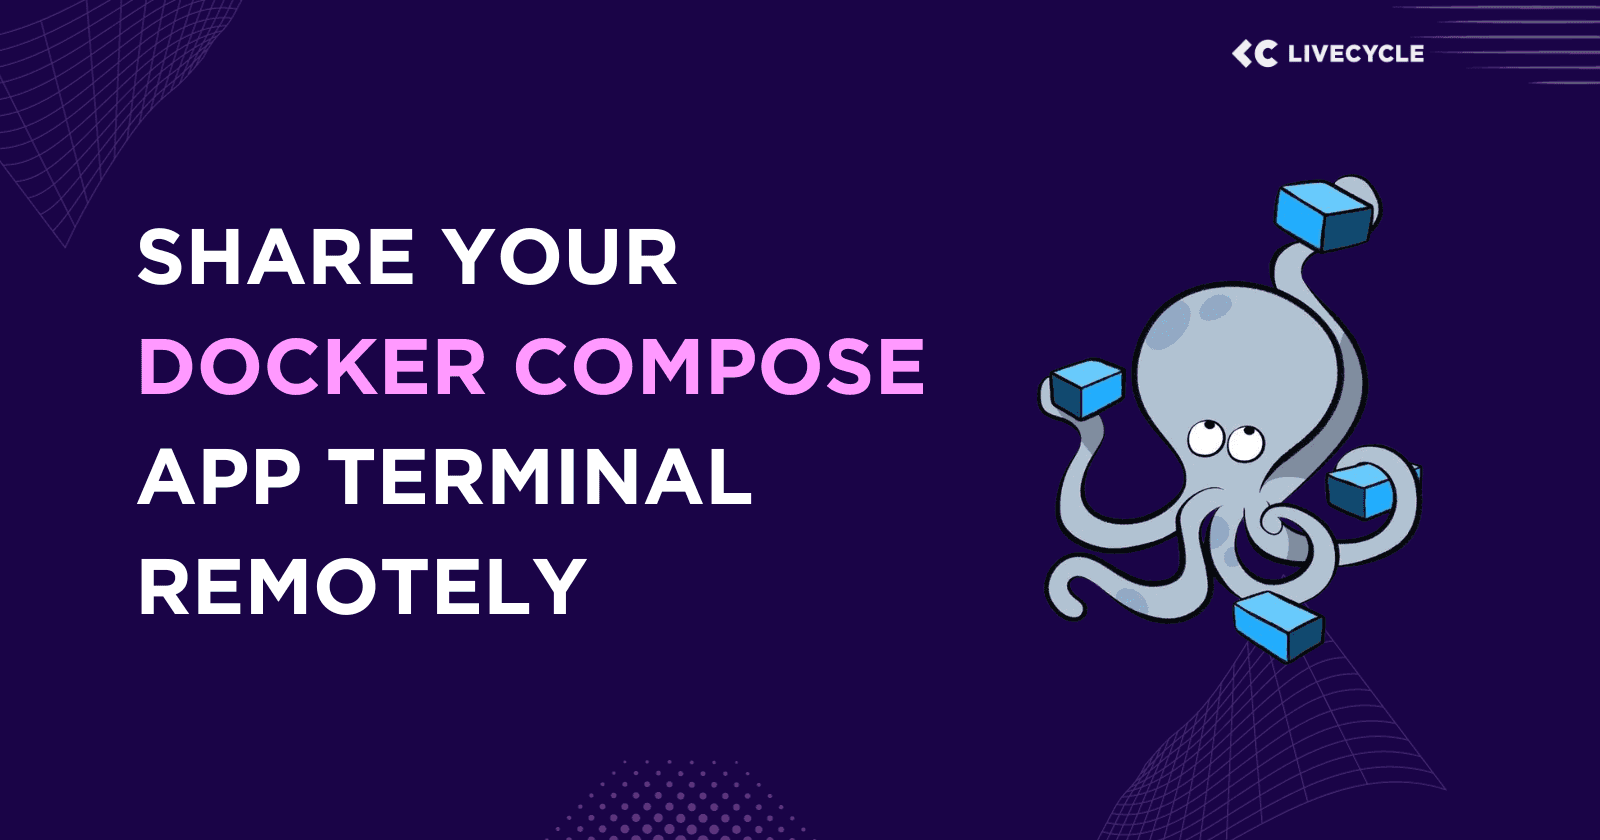 Share Your Docker Compose App Terminal Remotely